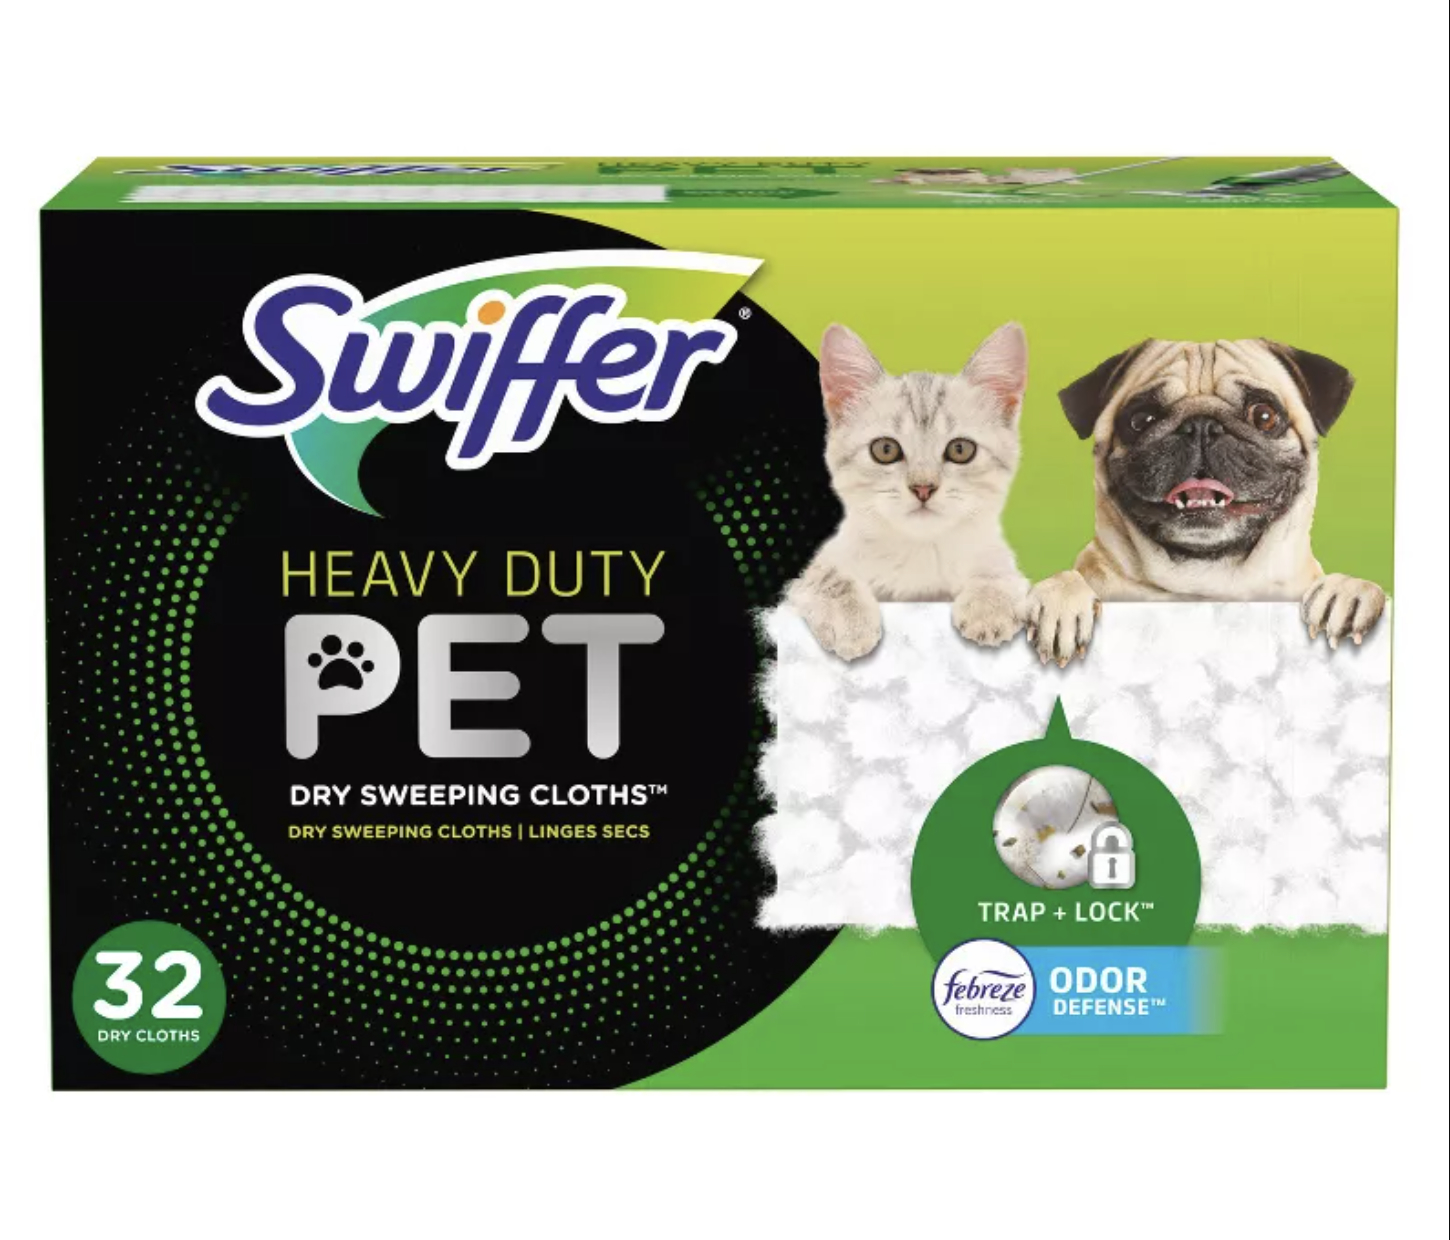 a package of heavy duty pet dry sweeping cloths with a dog and cat